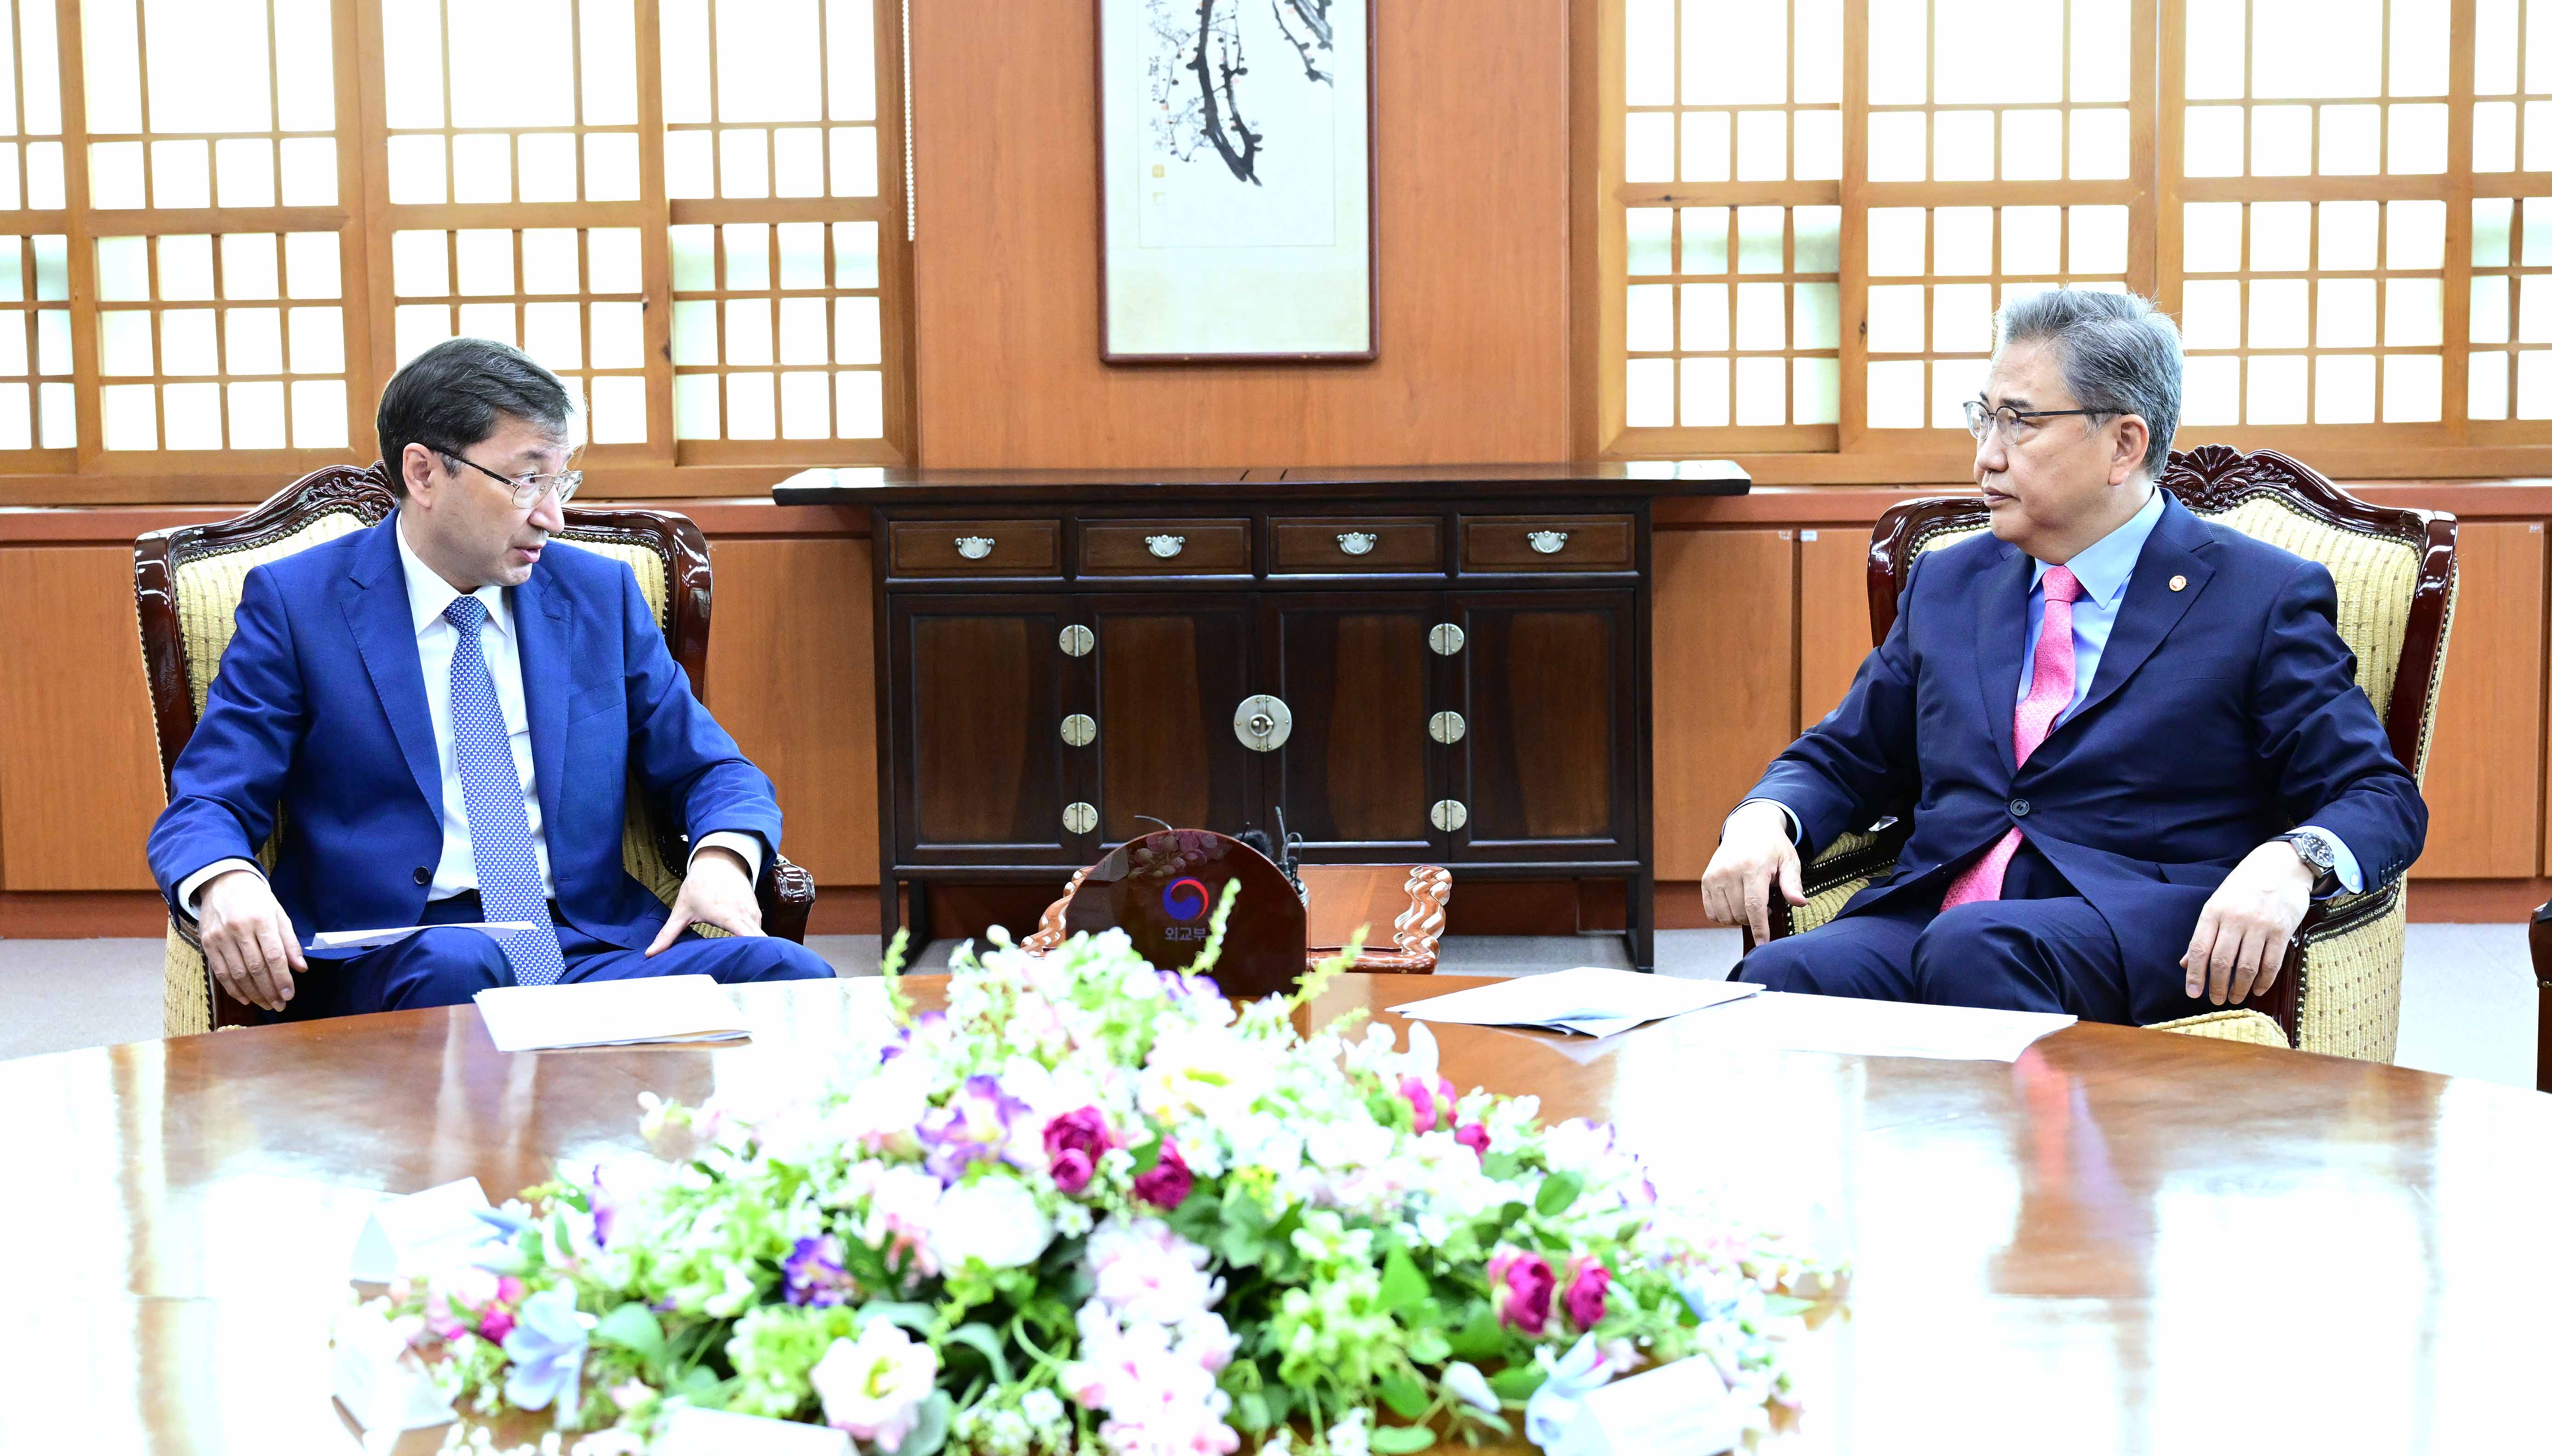 Ambassador of Kazakhstan Met with Minister of Foreign Affairs of the Republic of Korea